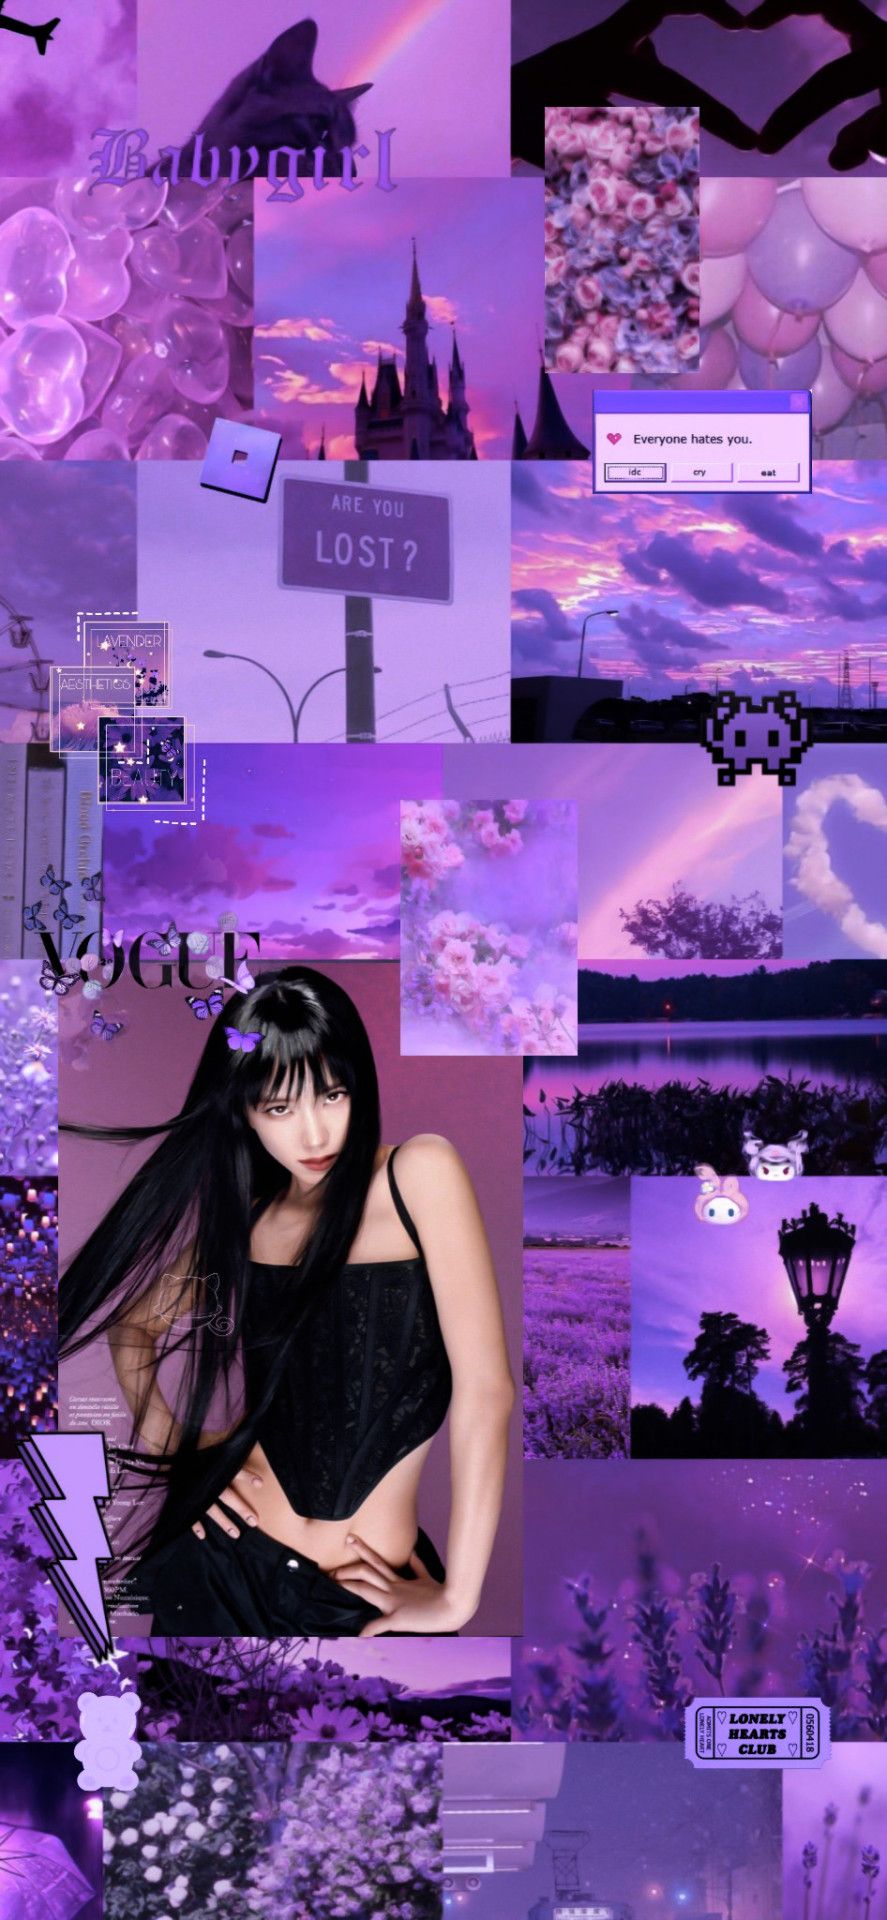 Aesthetic purple photo collage wallpaper for phone background with Selena Quintanilla. - BLACKPINK